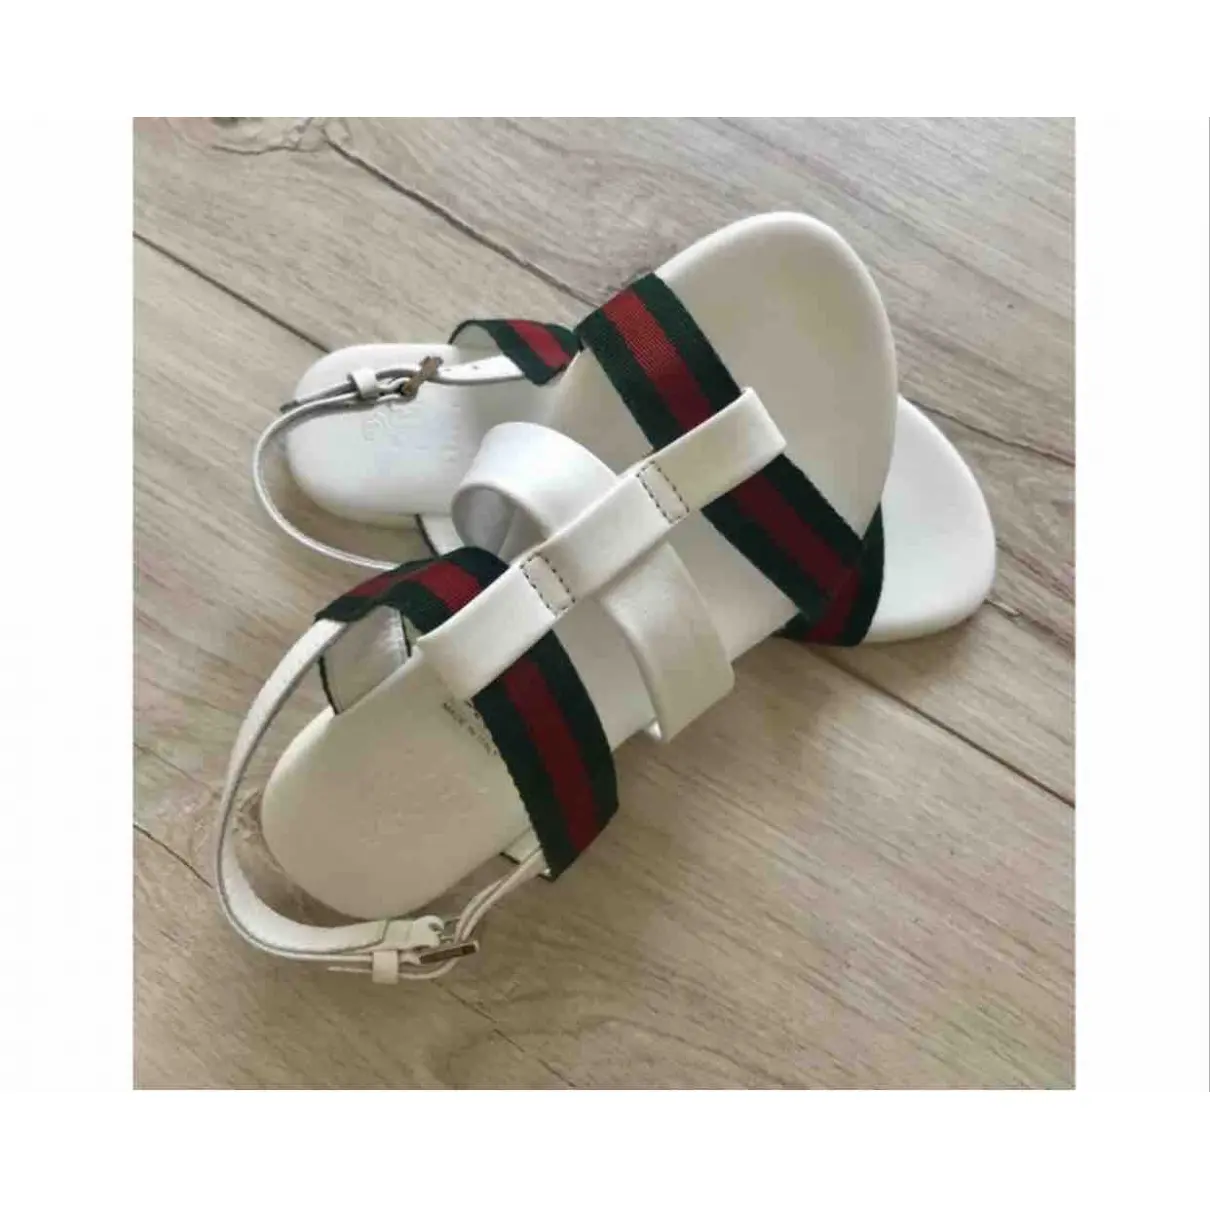 Gucci Leather sandals for sale